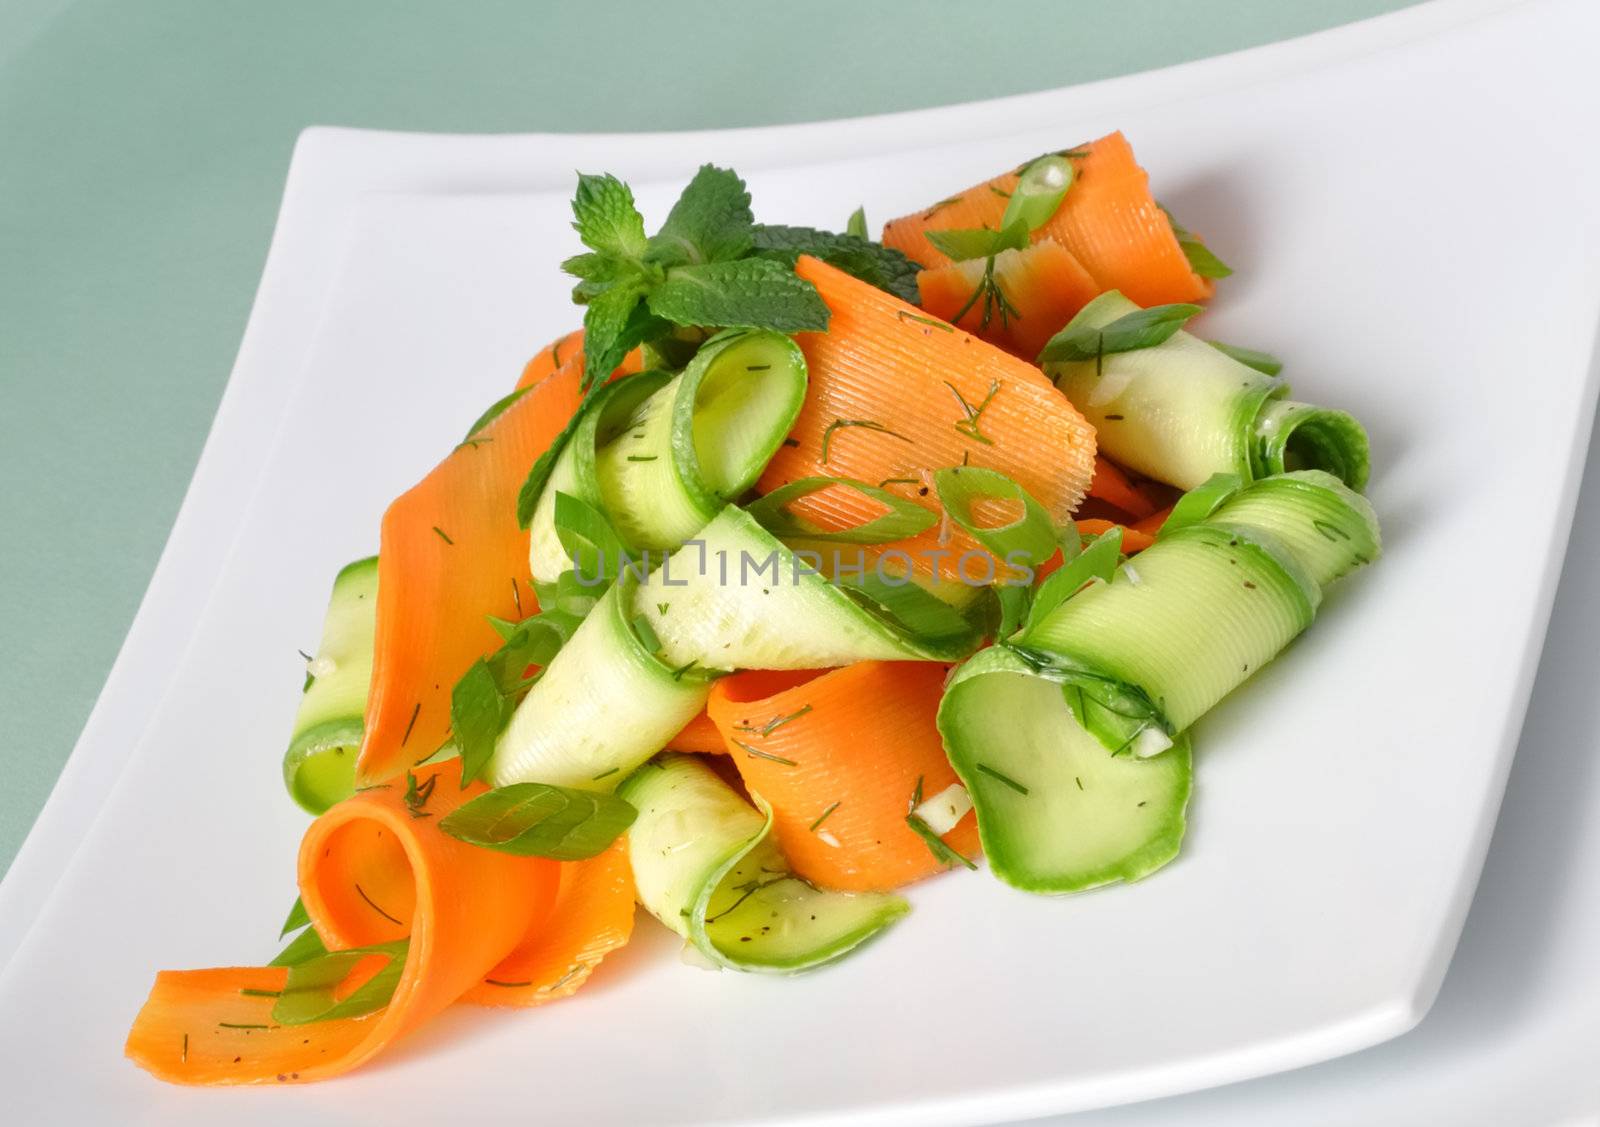 Zucchini salad with carrots by Apolonia